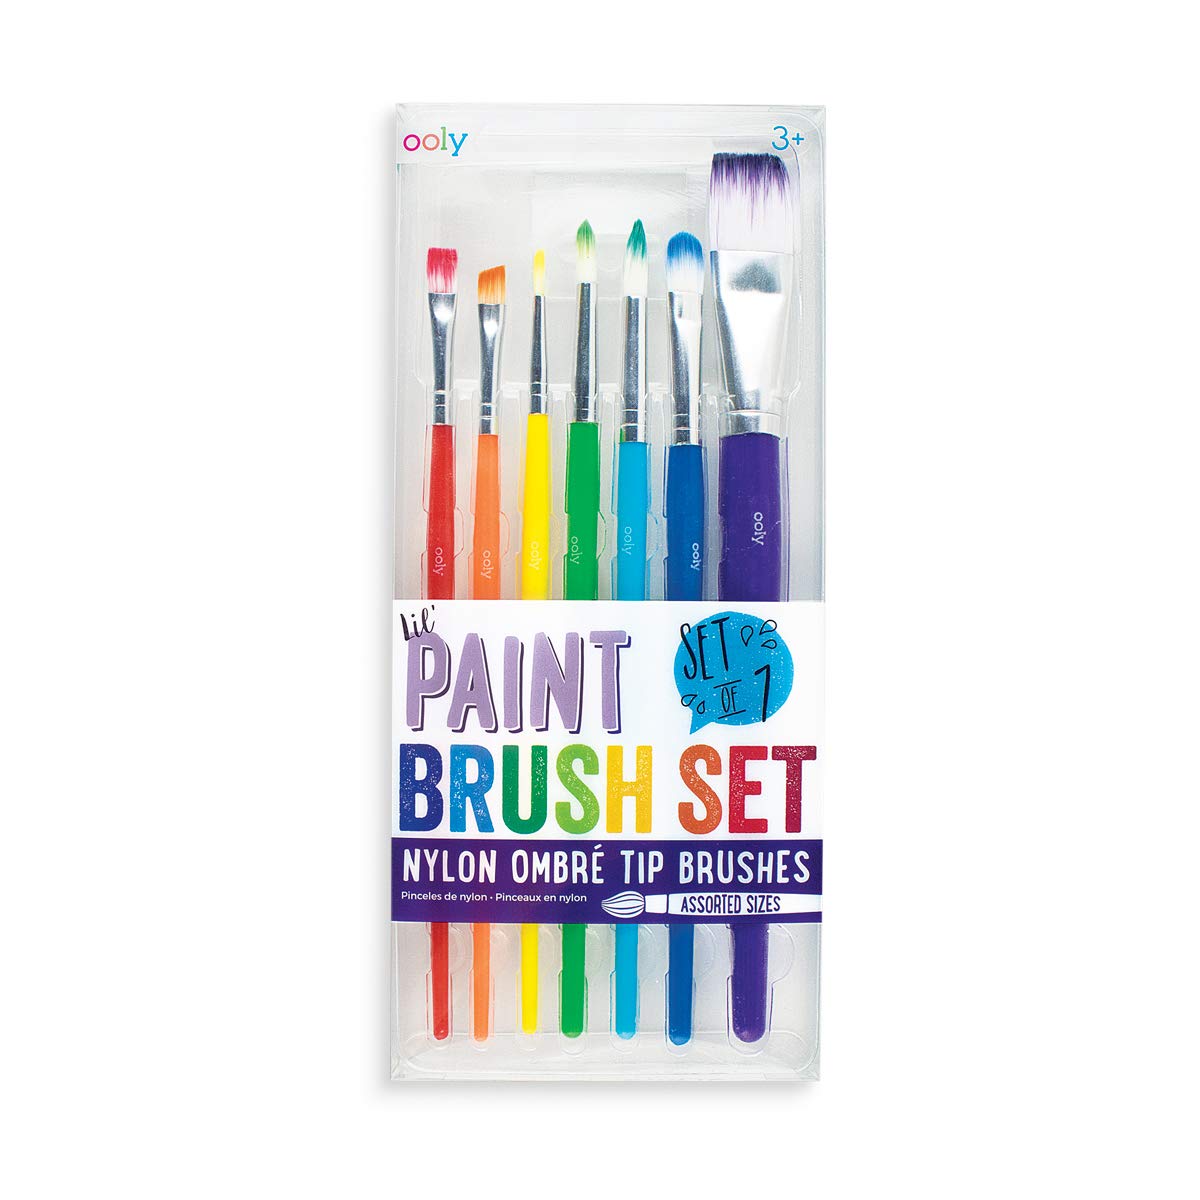 Ooly Lil Paint Brushes - Set of 7